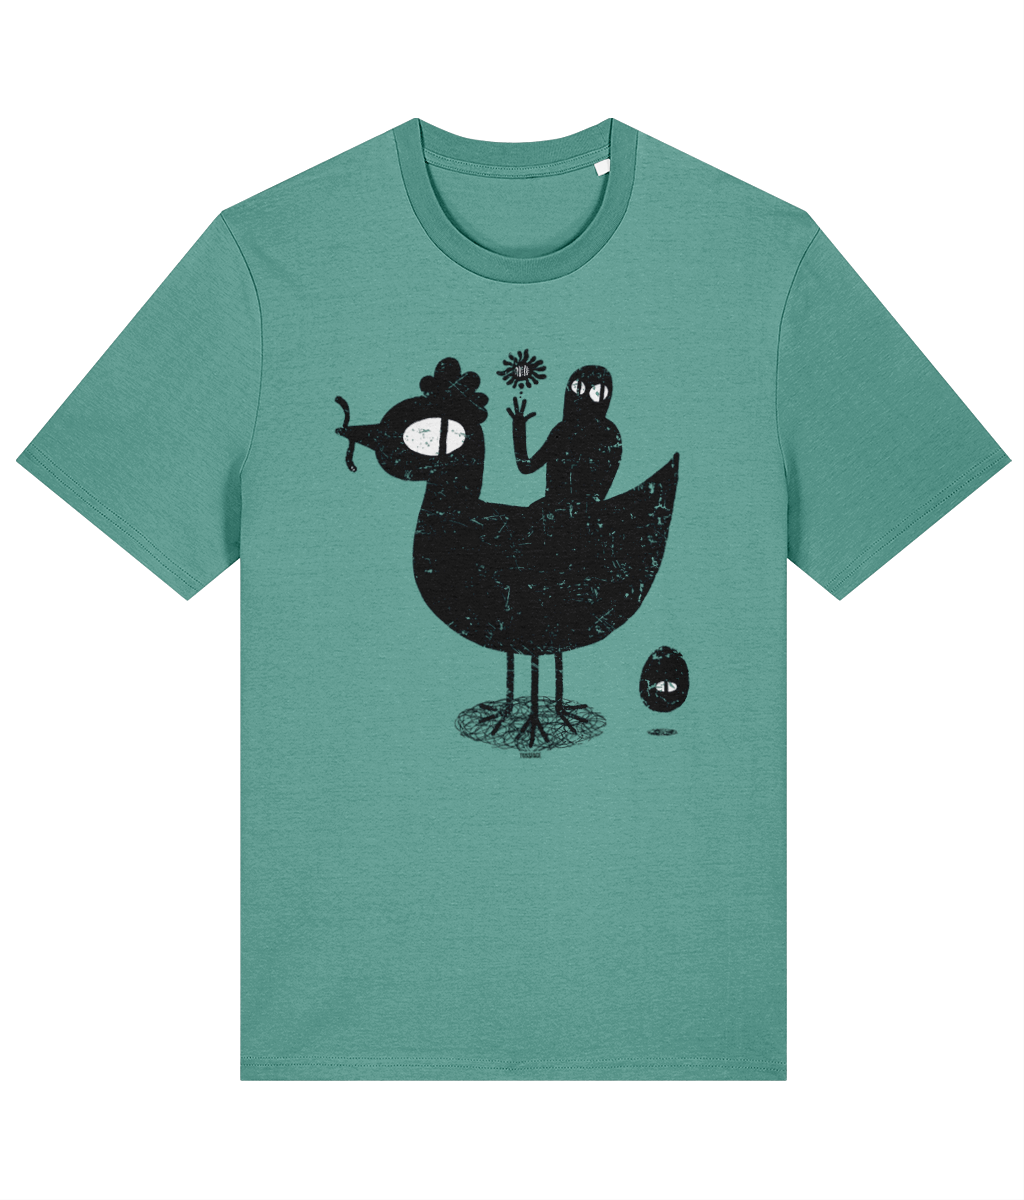 WELCOME THE EGGMAN - We Are Bl1p T-shirt by Tussface